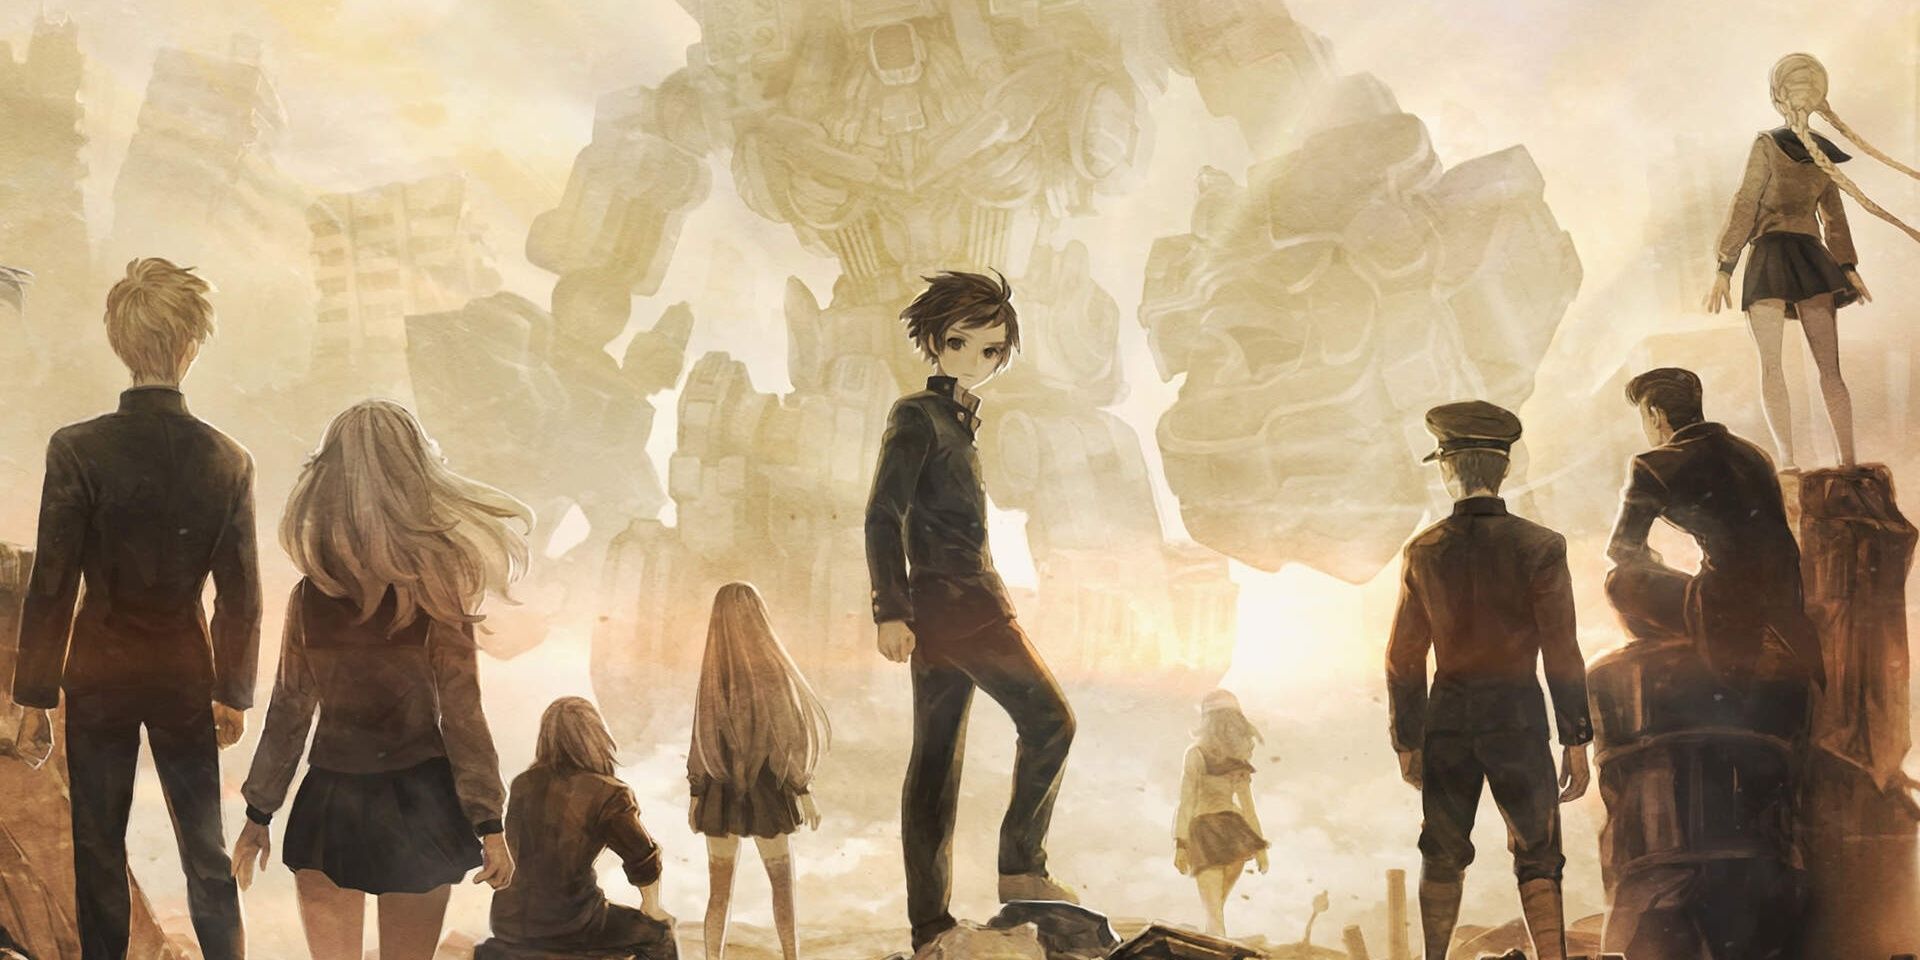 Nine of the main characters of 13 Sentials Aegis Rim in front of a mech in art for the game